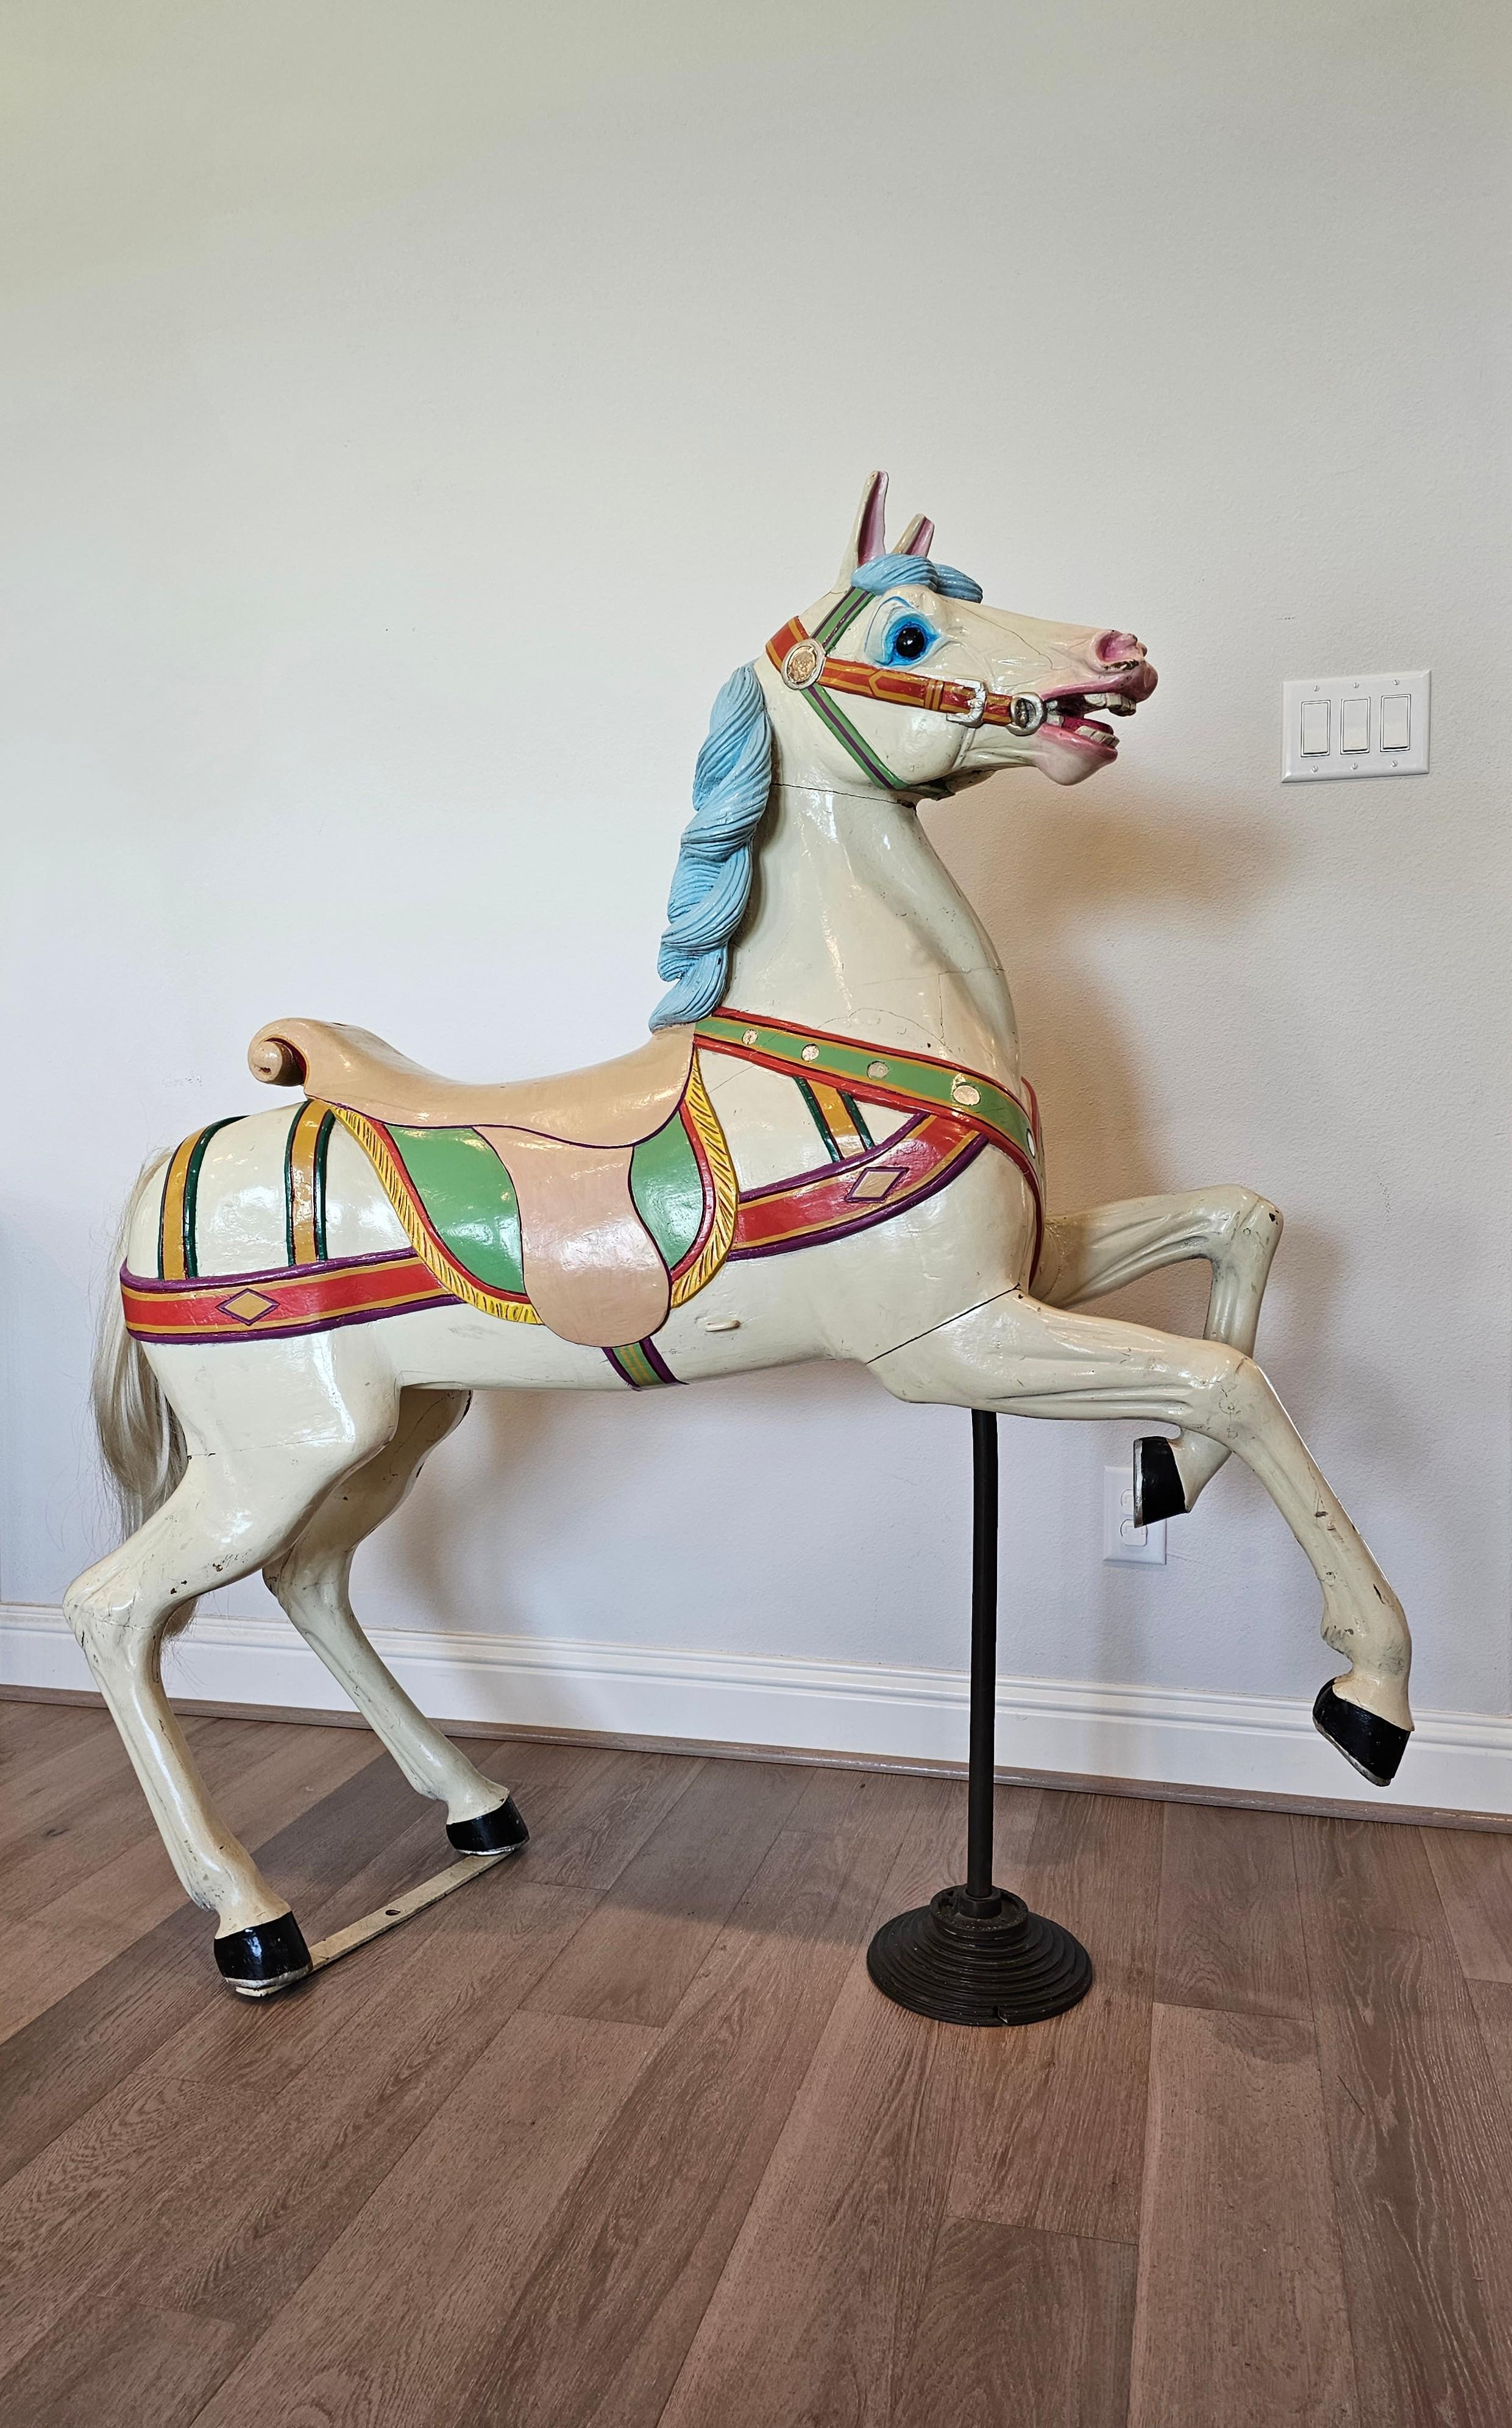 A rare antique, circa 1890s, German hand carved and painted wood carousel horse carnival fair ride by Peter Schneider (famous for making the first double decker carousel in 1898).

Exquisitely hand-crafted by Philip Schneider in Frankfurt,